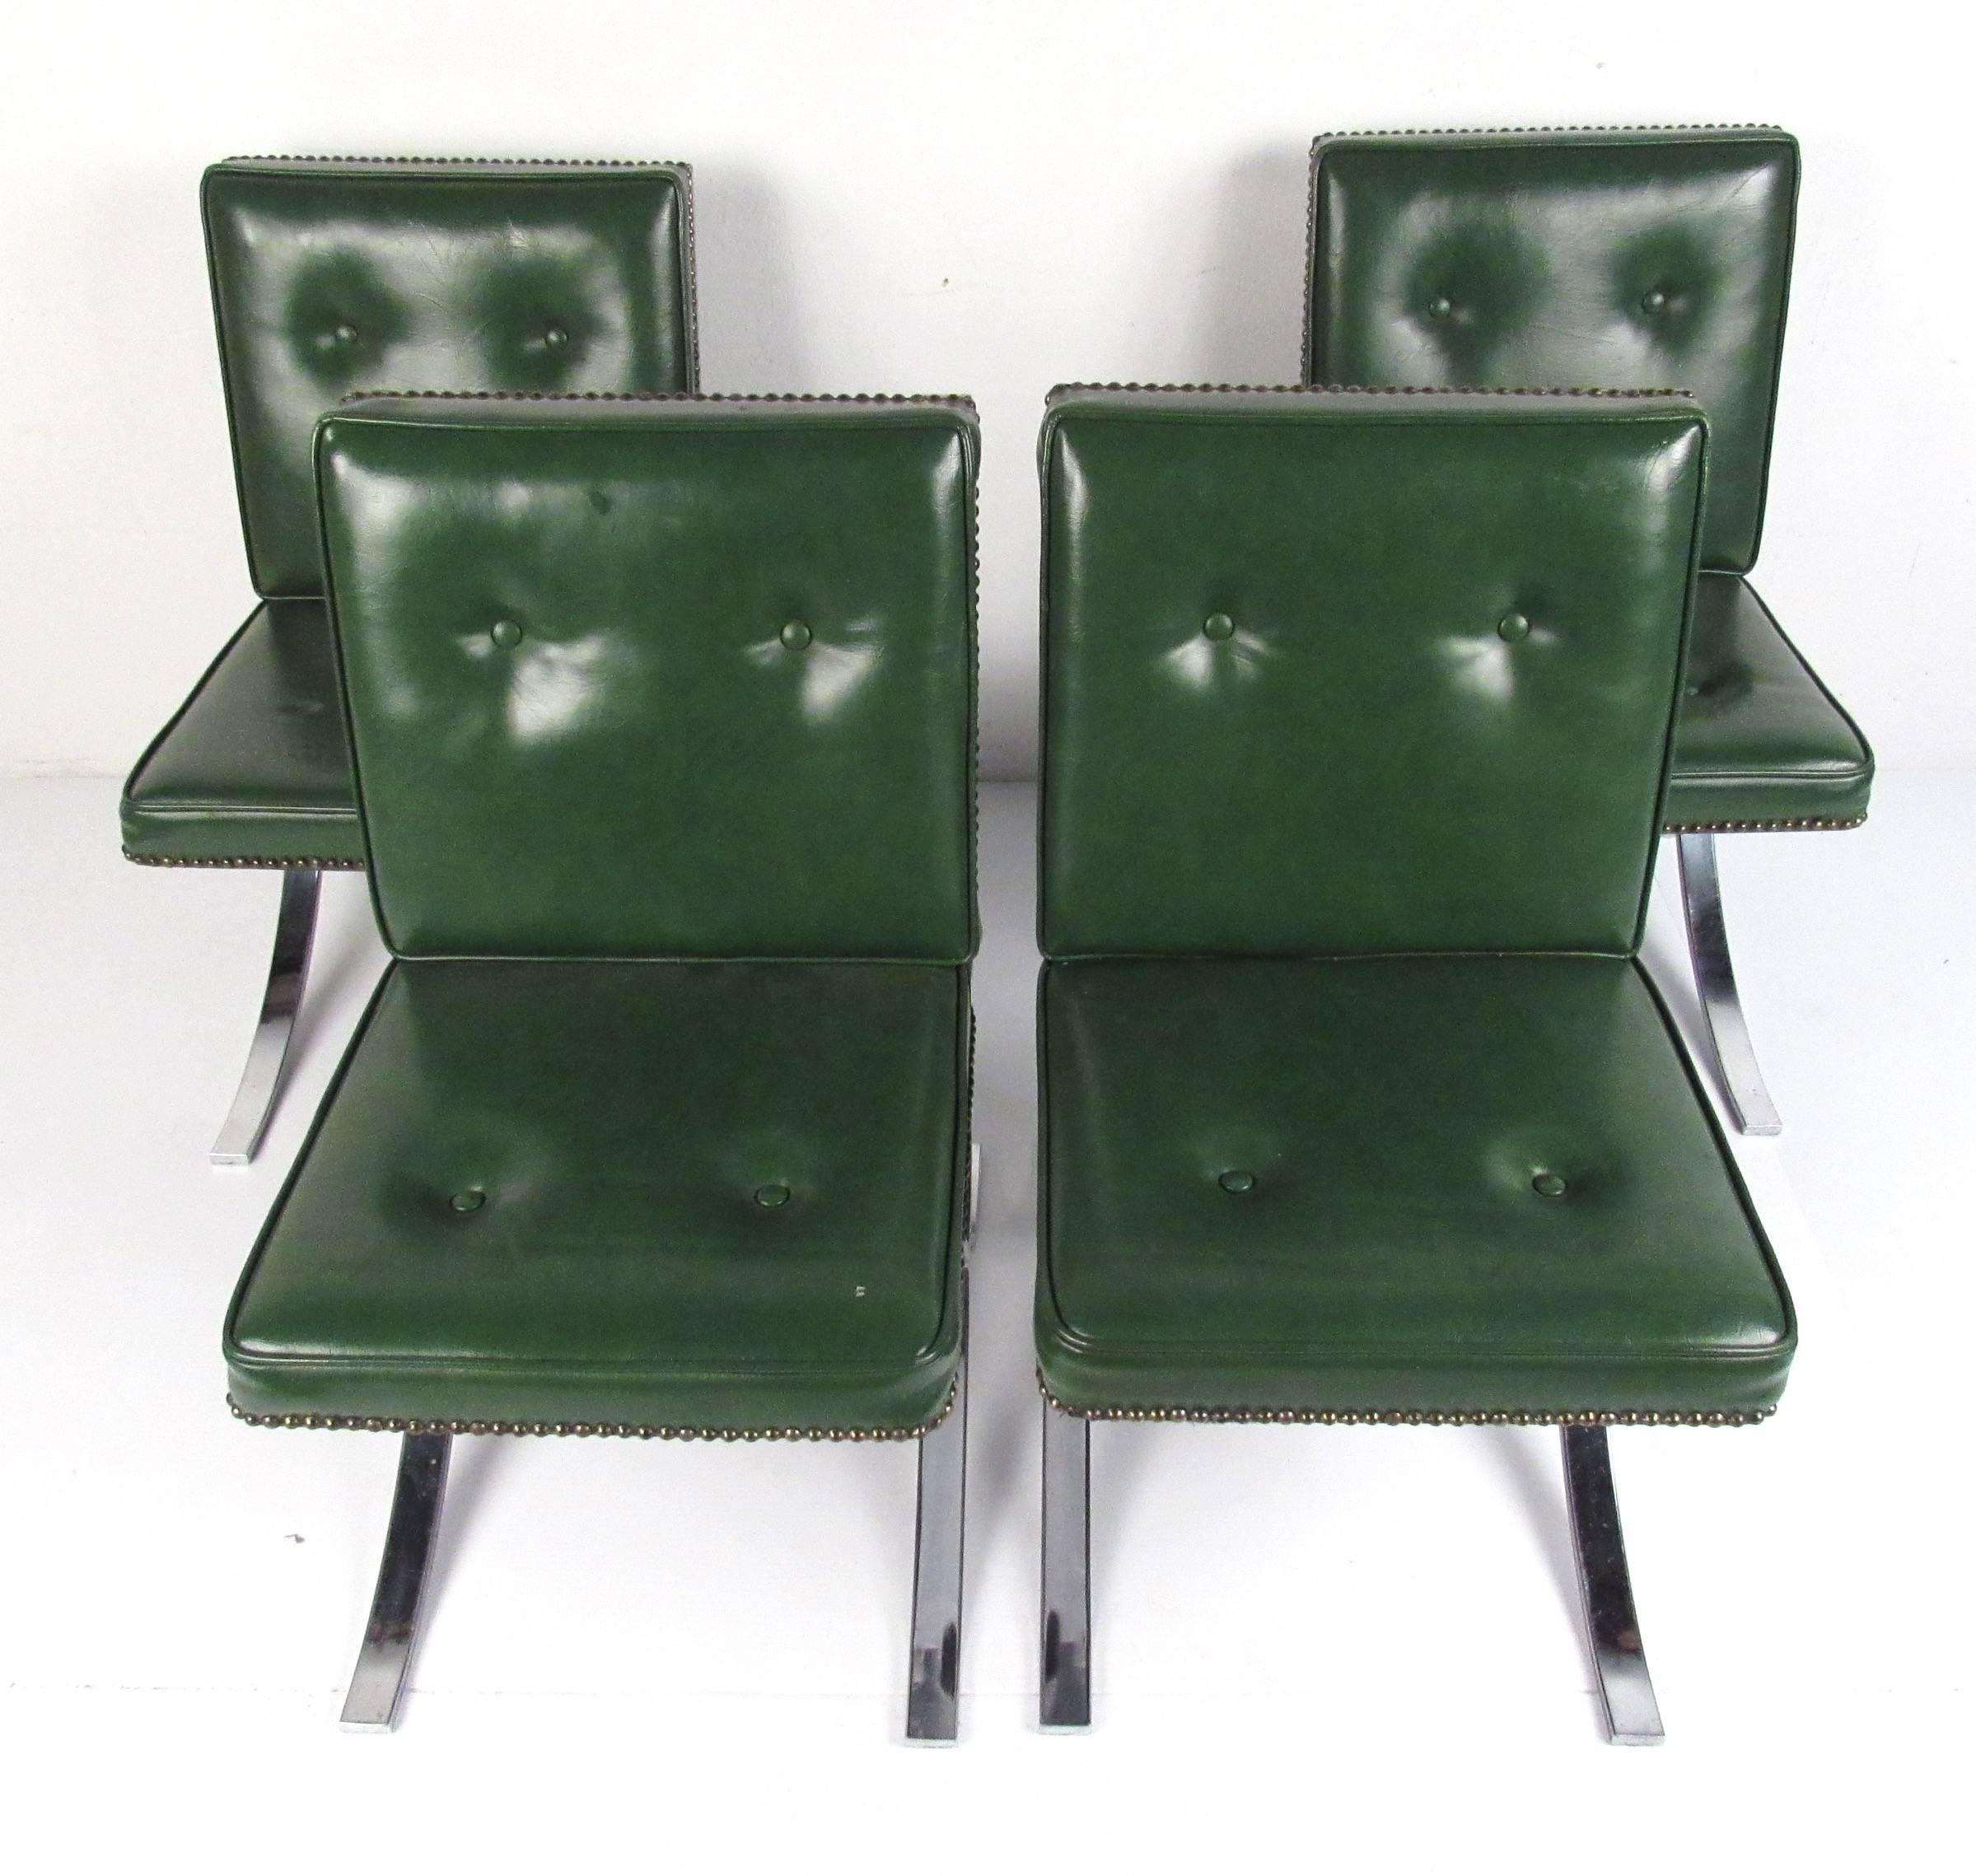 In the style Mies' Barcelona chair, these stylish green vinyl and chrome chairs make great dining or side chairs in any modern setting. The glossy green vinyl is nicely contrasted by the decorative brass tacks and the gentle curves of the chrome